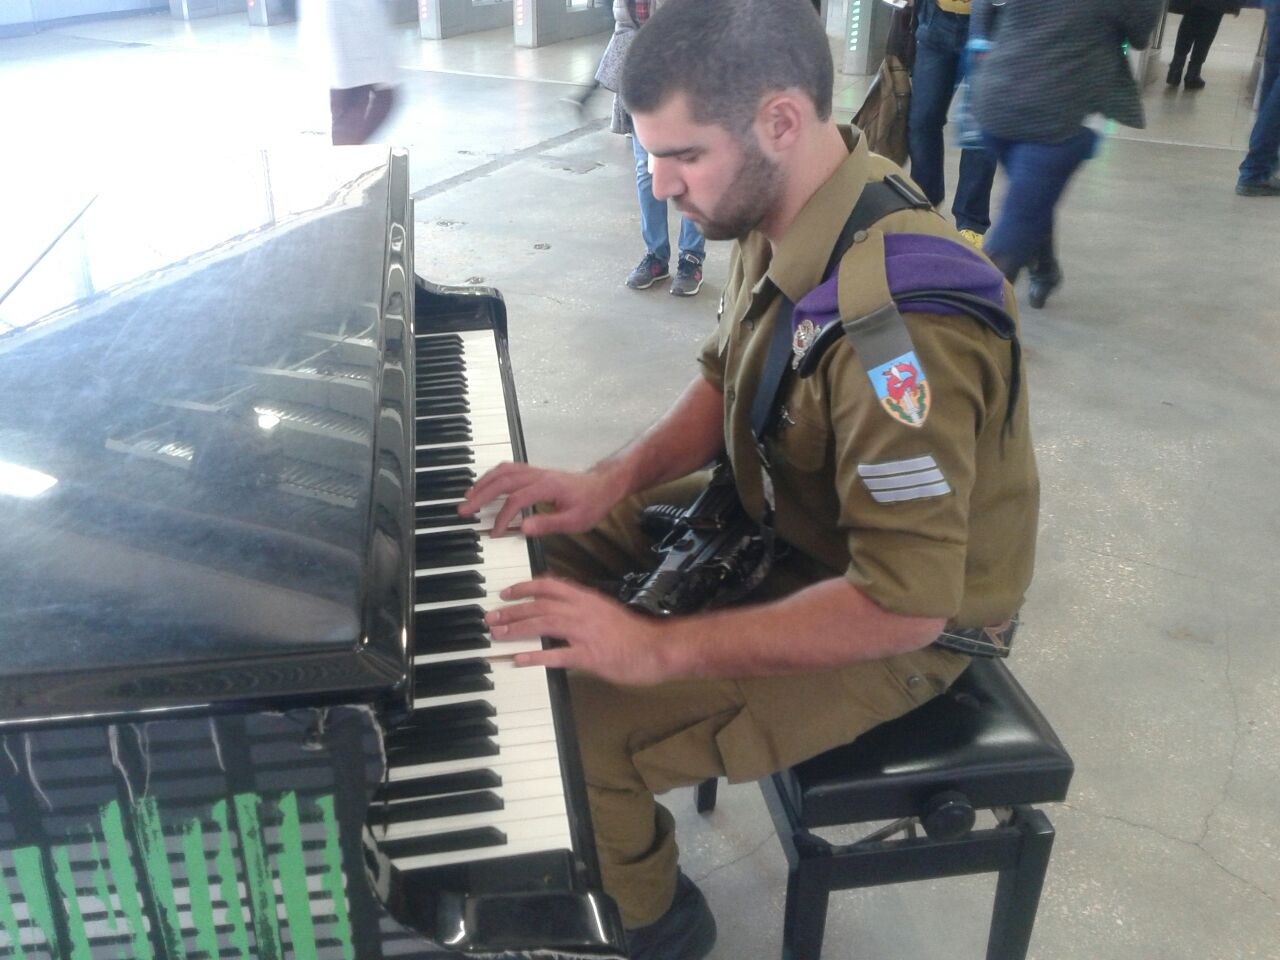 SOldier piano